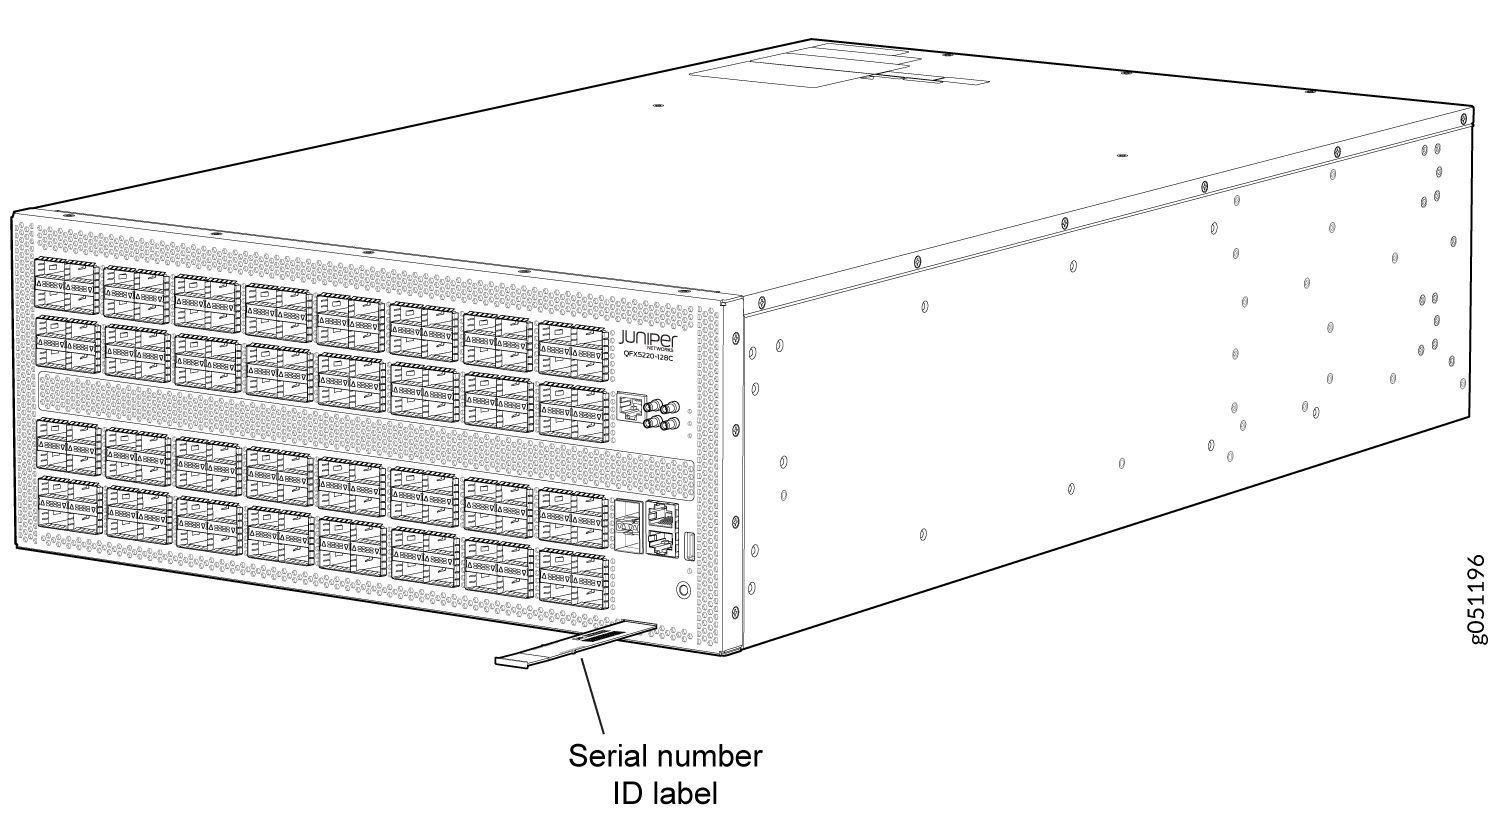 Location of the Serial Number ID Label on a QFX5220-128C Switch